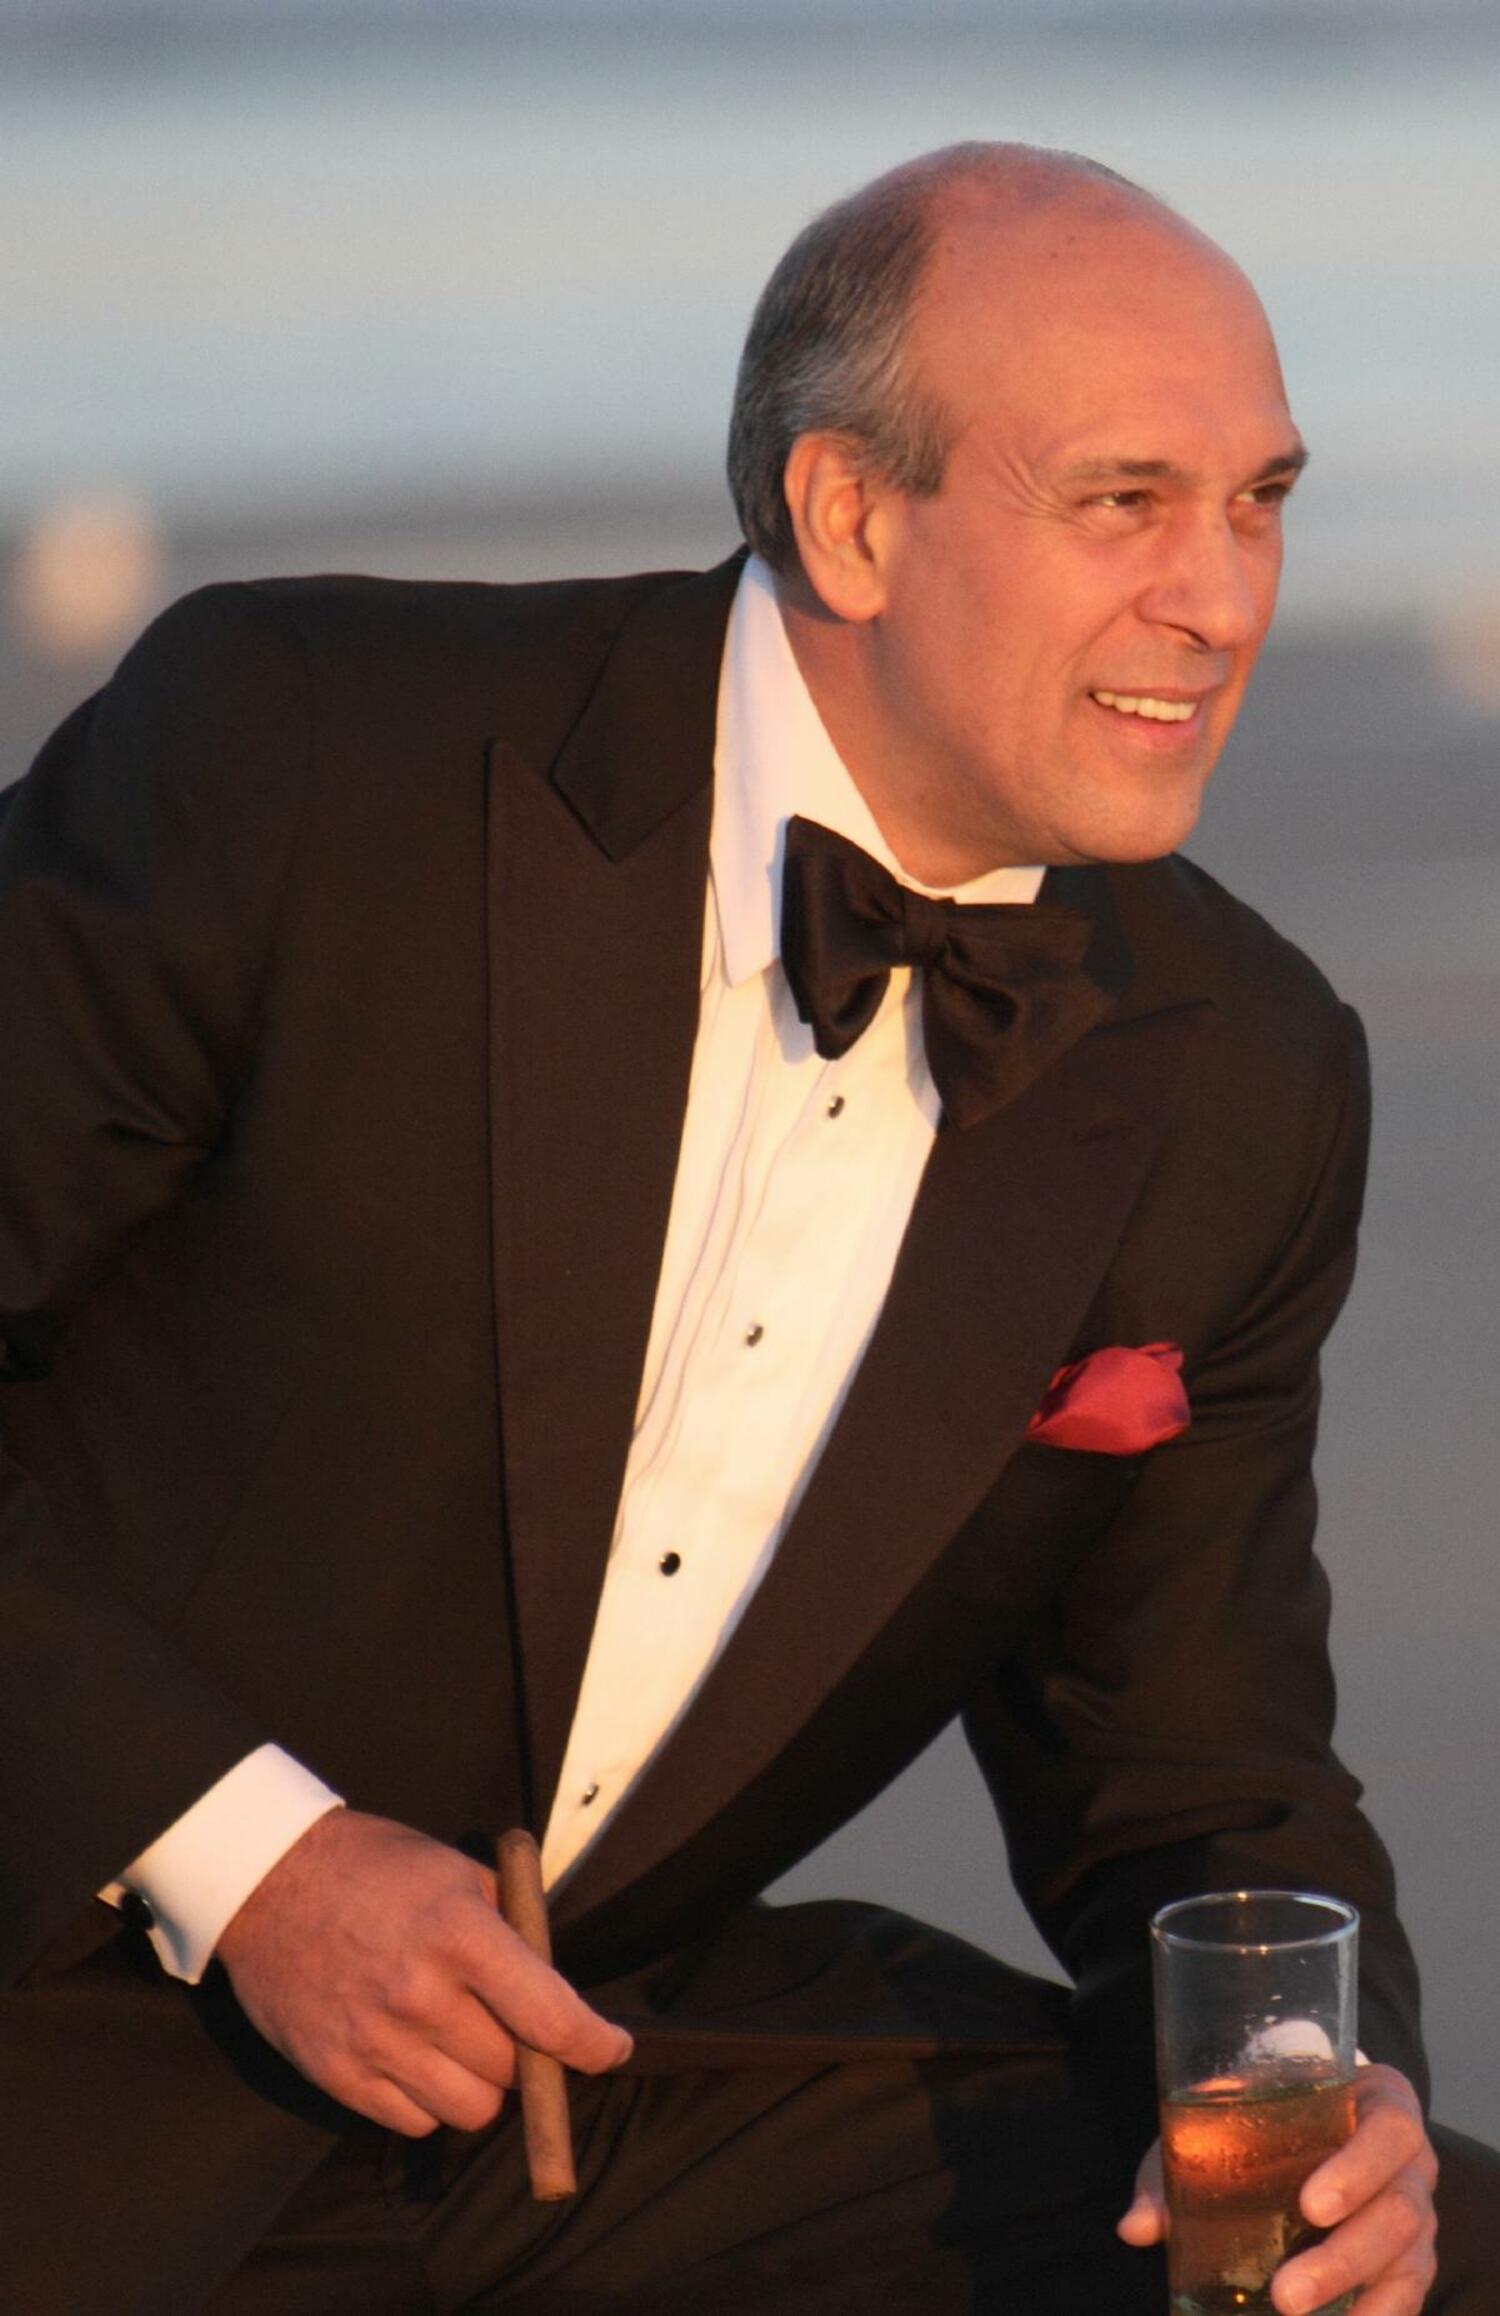 Steven Maglio and his big band orchestra will open the Westhampton Beach Project weekend on the Great Lawn on Friday, July 26, with “Not Just Sinatra.” COURTESY WESTHAMPTON BEACH PROJECT